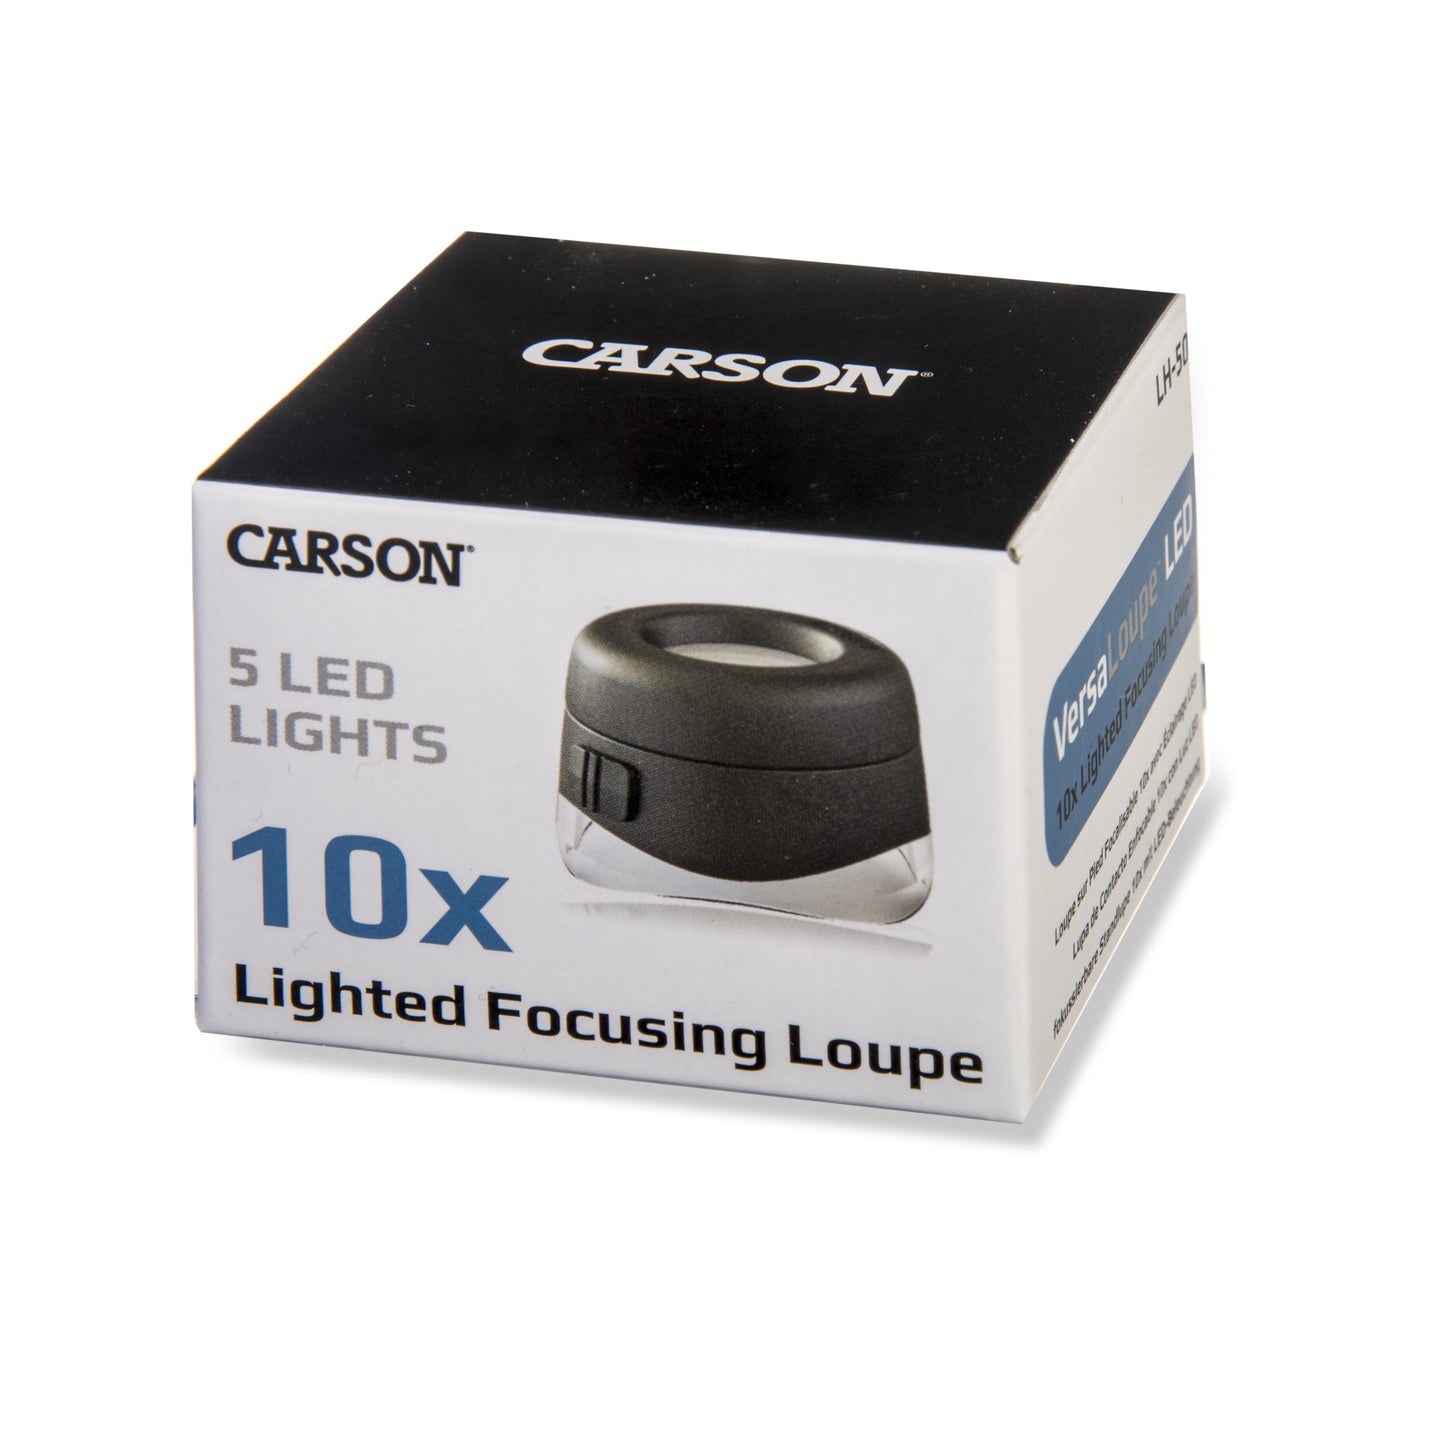 Carson LED VersaLoupe 10x LED Lighted Focusing Loupe Magnifier LH-50